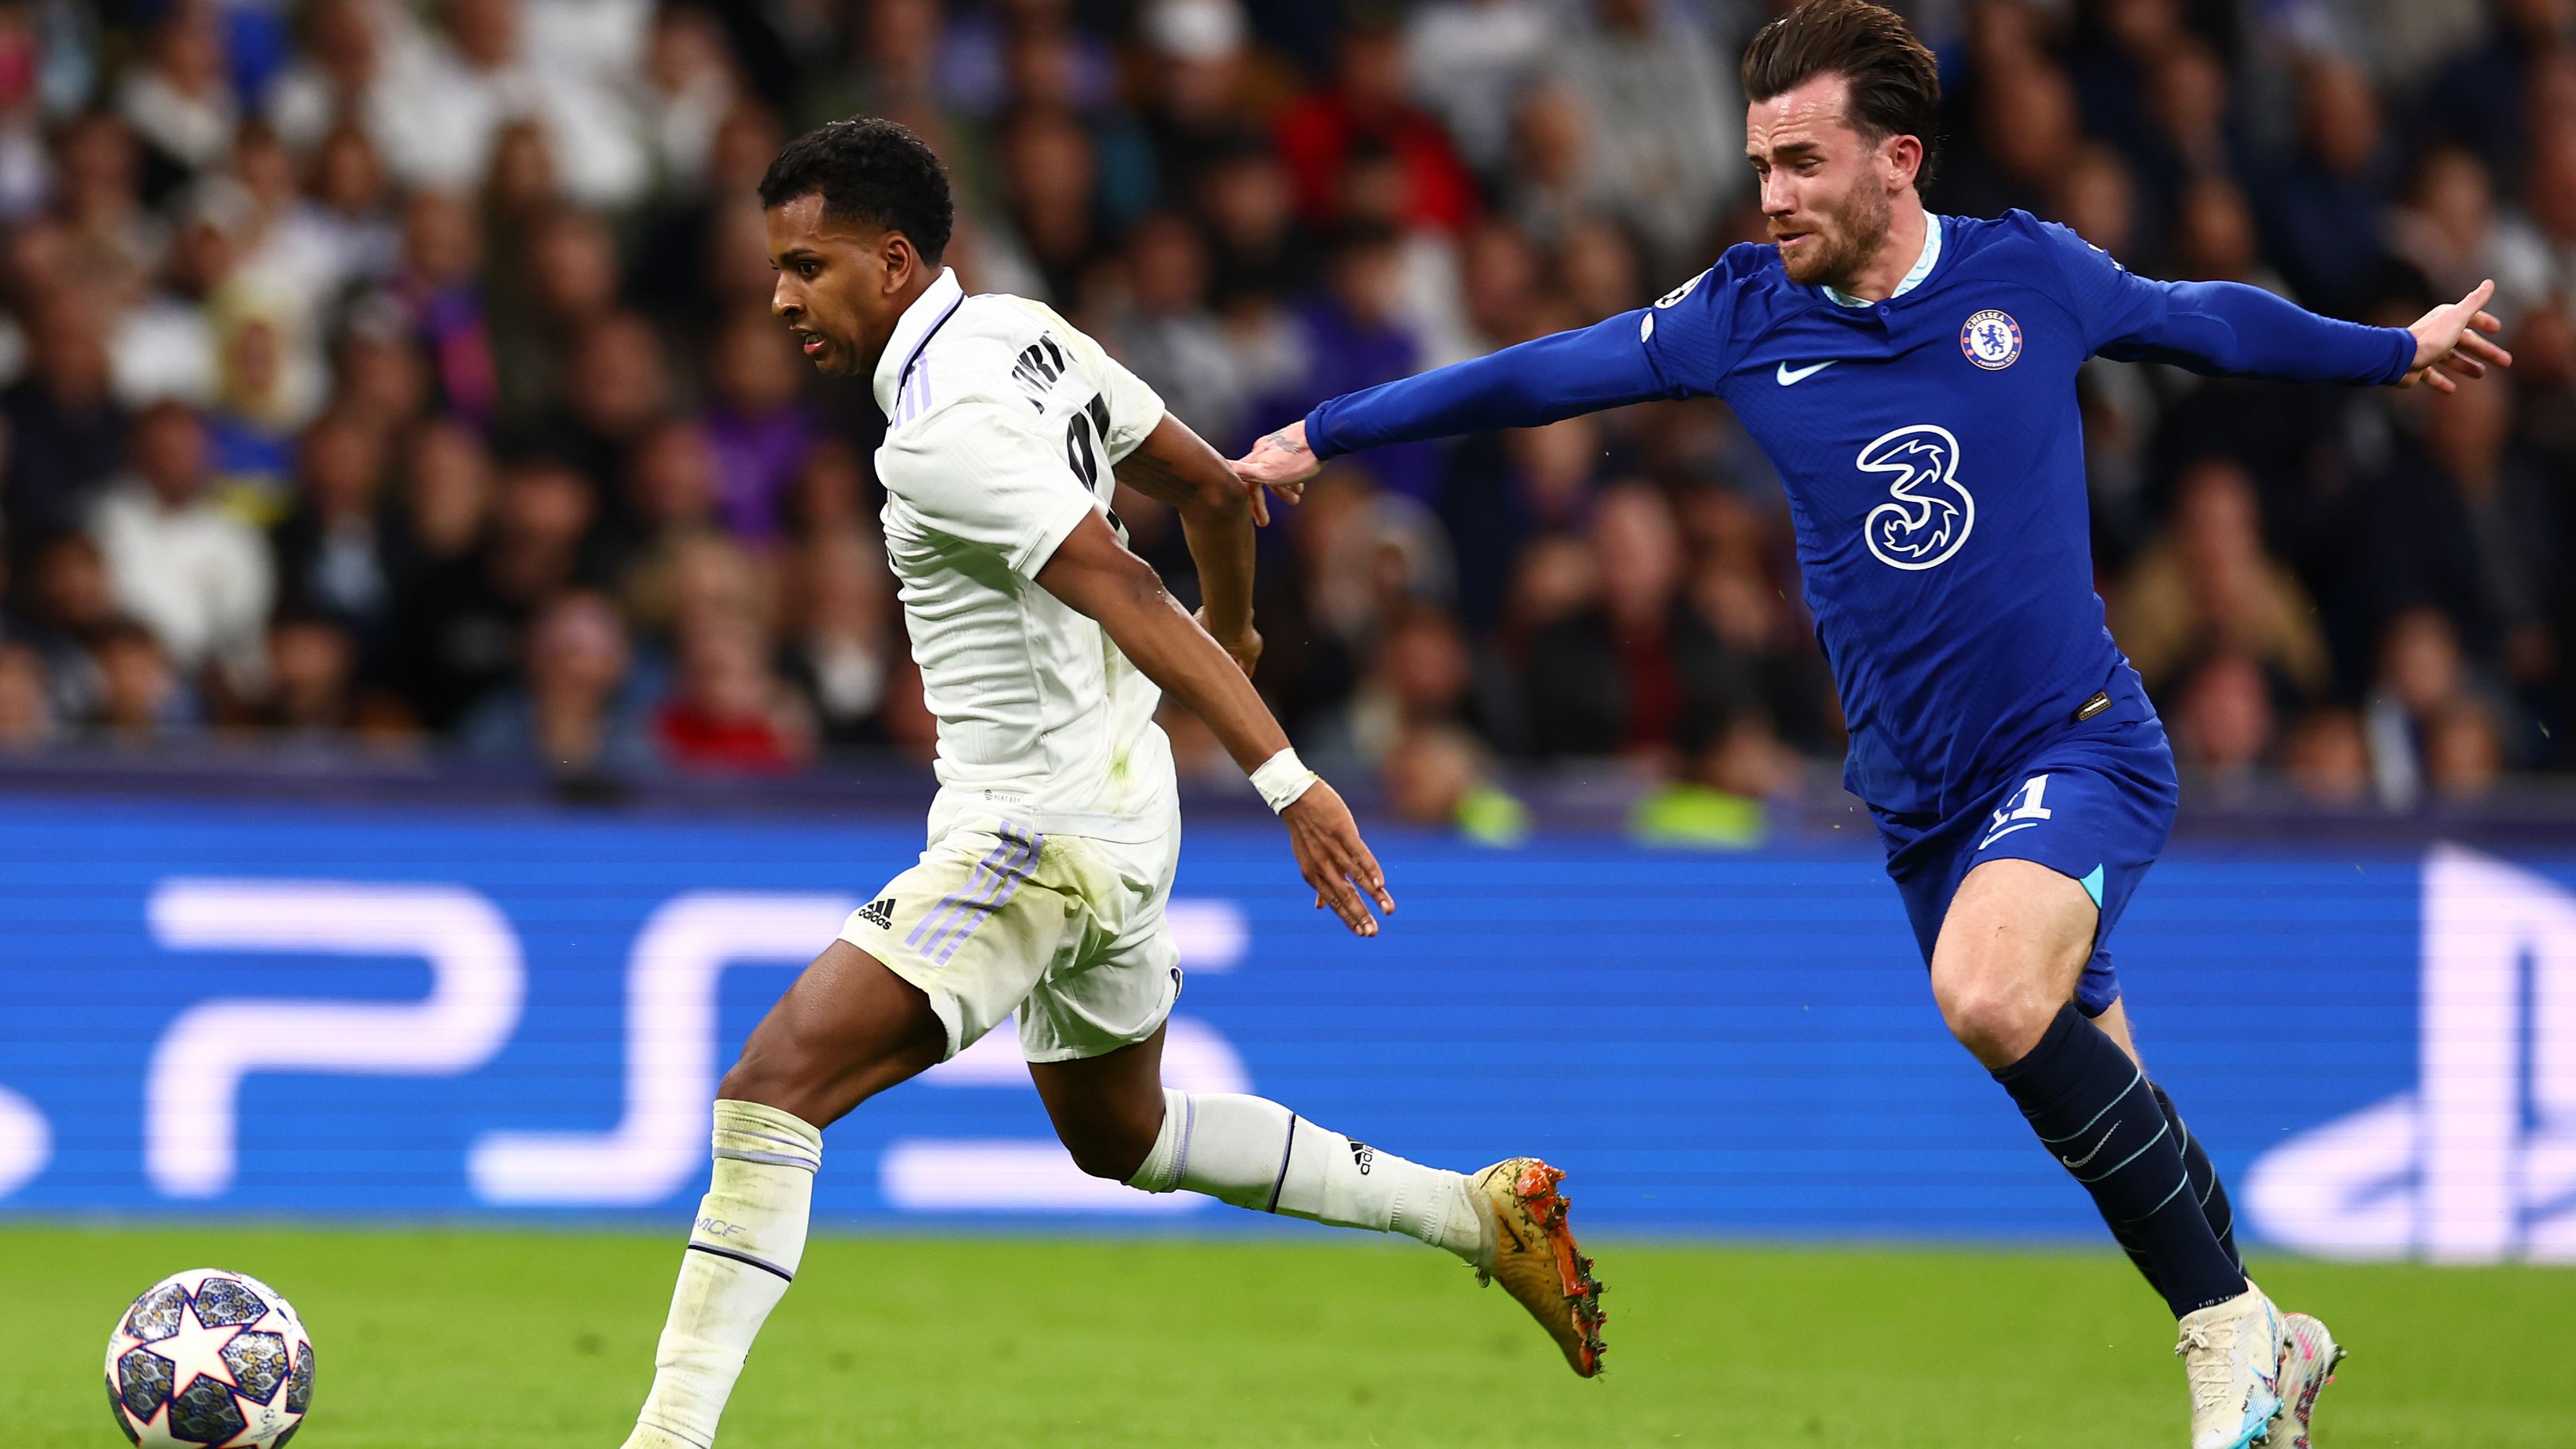 Ben Chilwell of Chelsea fouls Rodrygo of Real Madrid and is subsequently shown a red card.